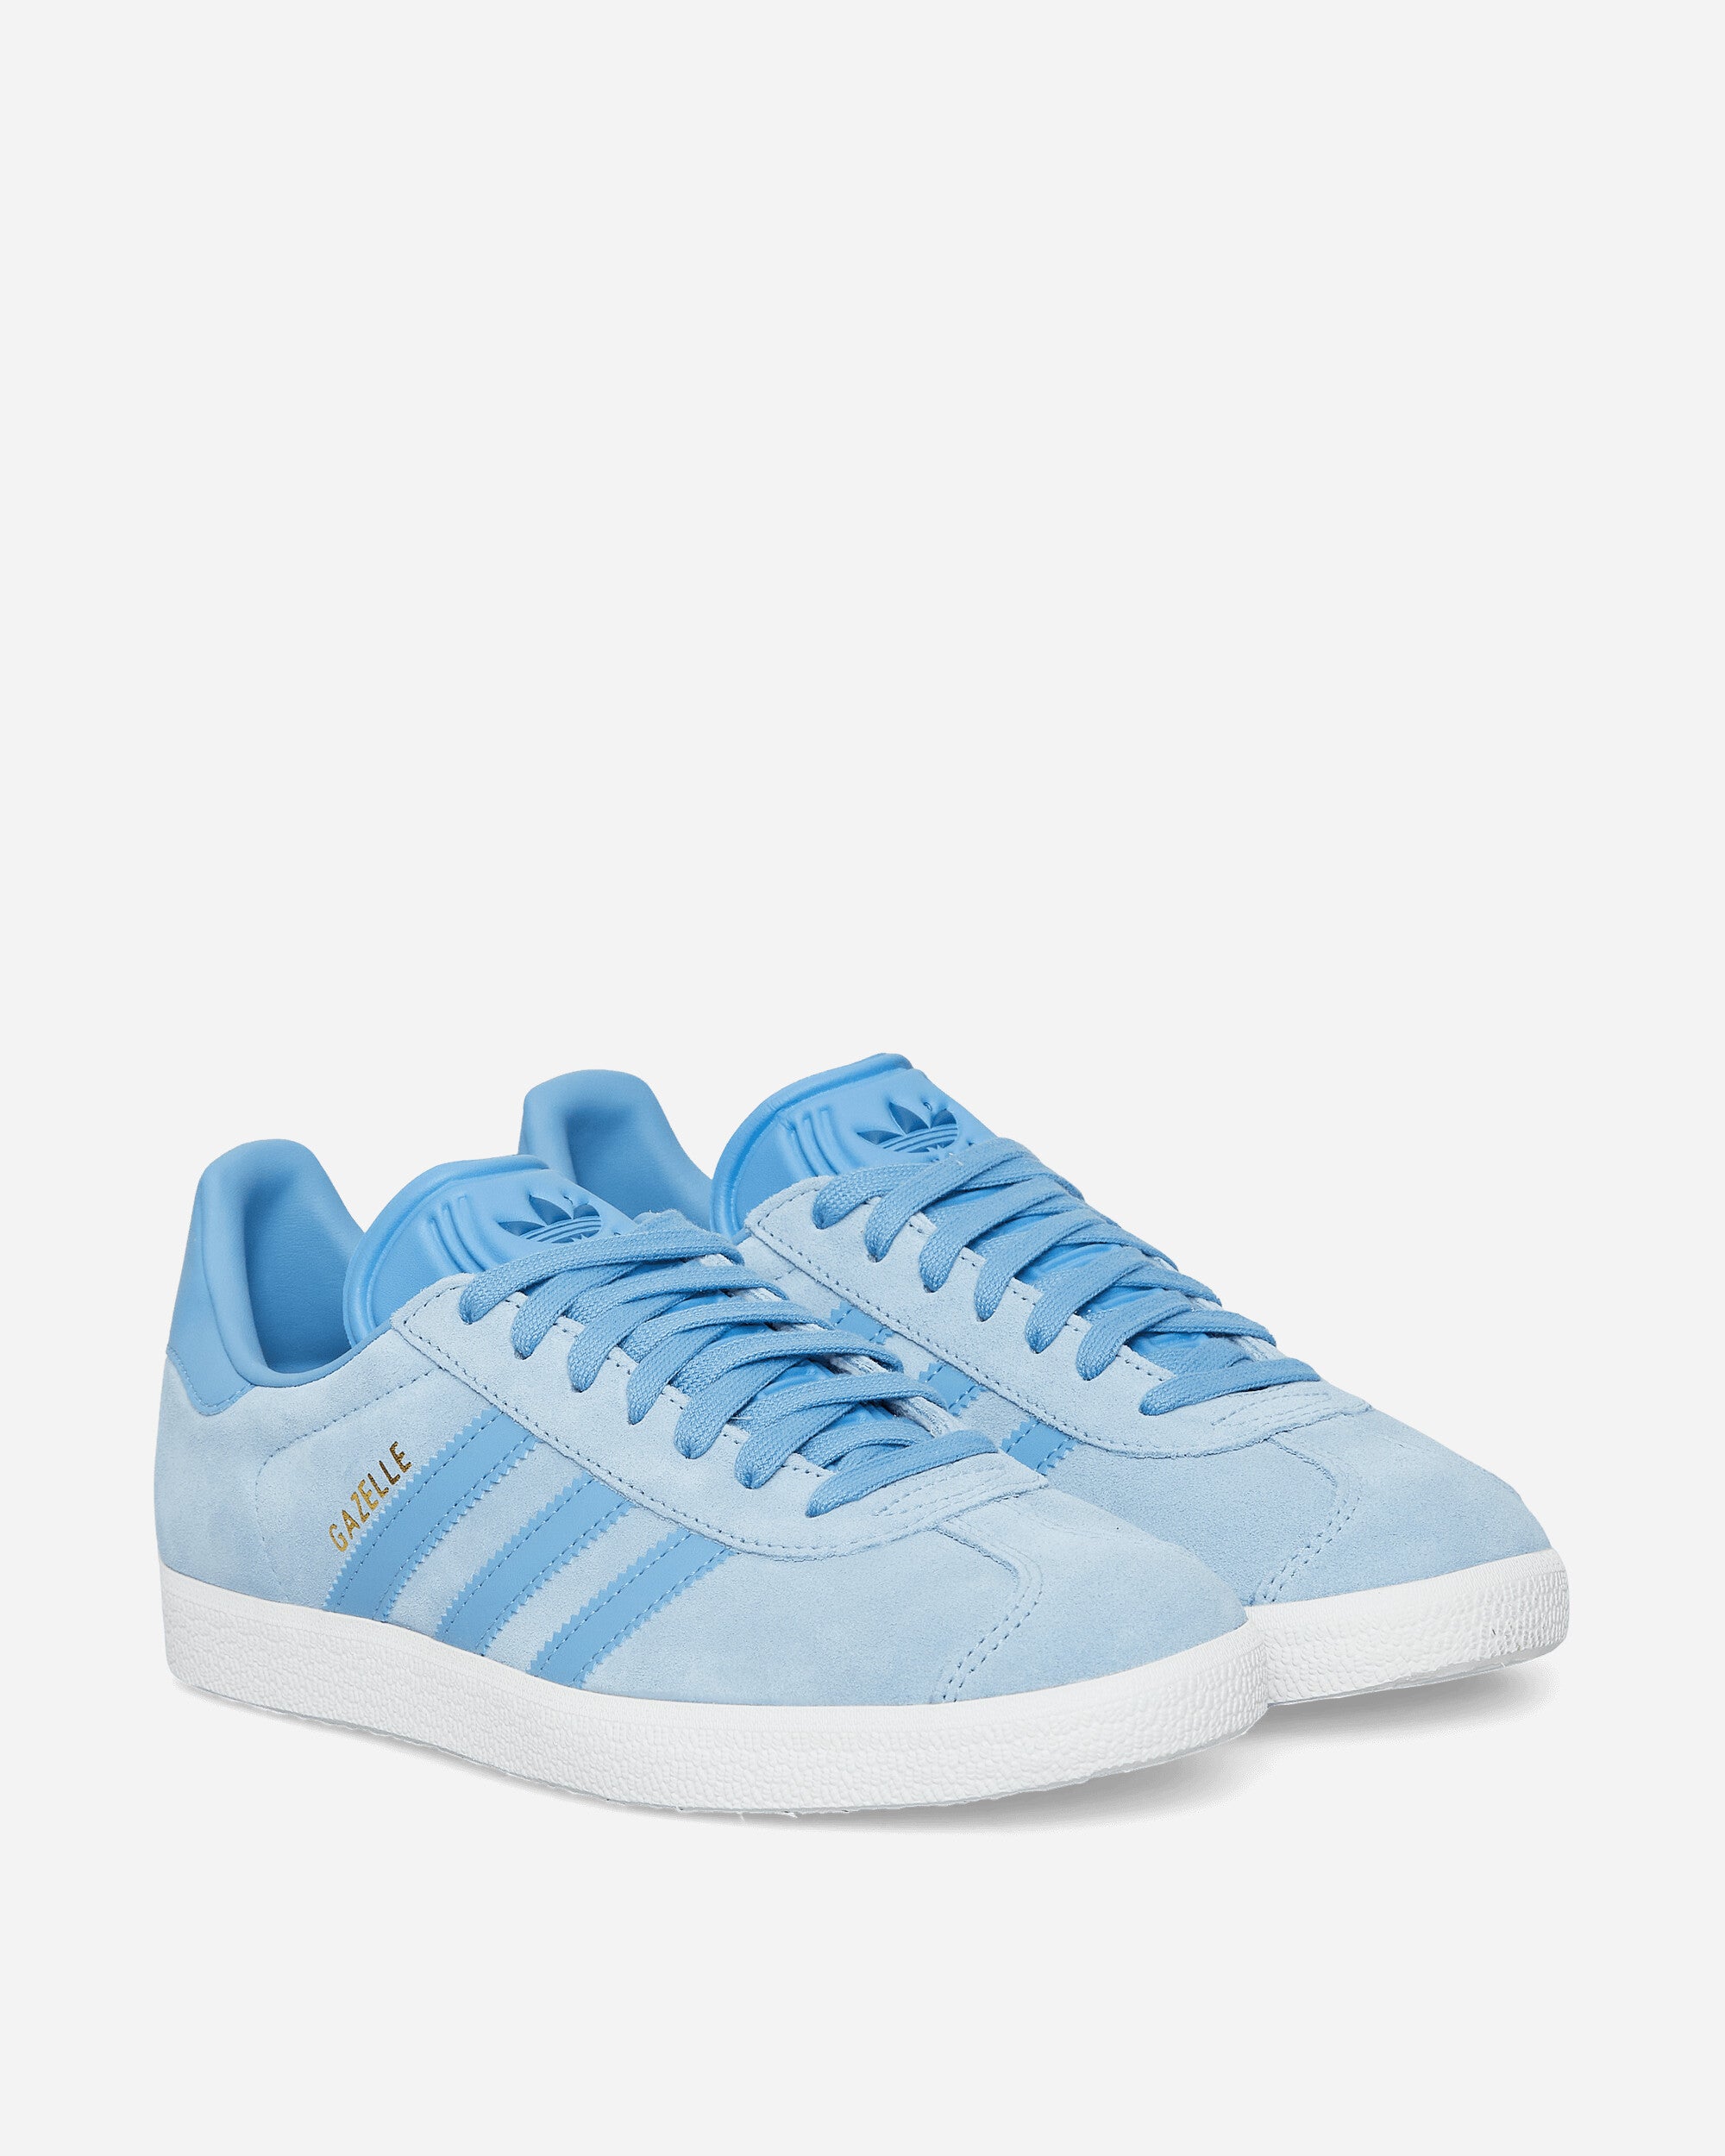 adidas Gazelle Clblue/Ltblue Sneakers Low IG4987 001